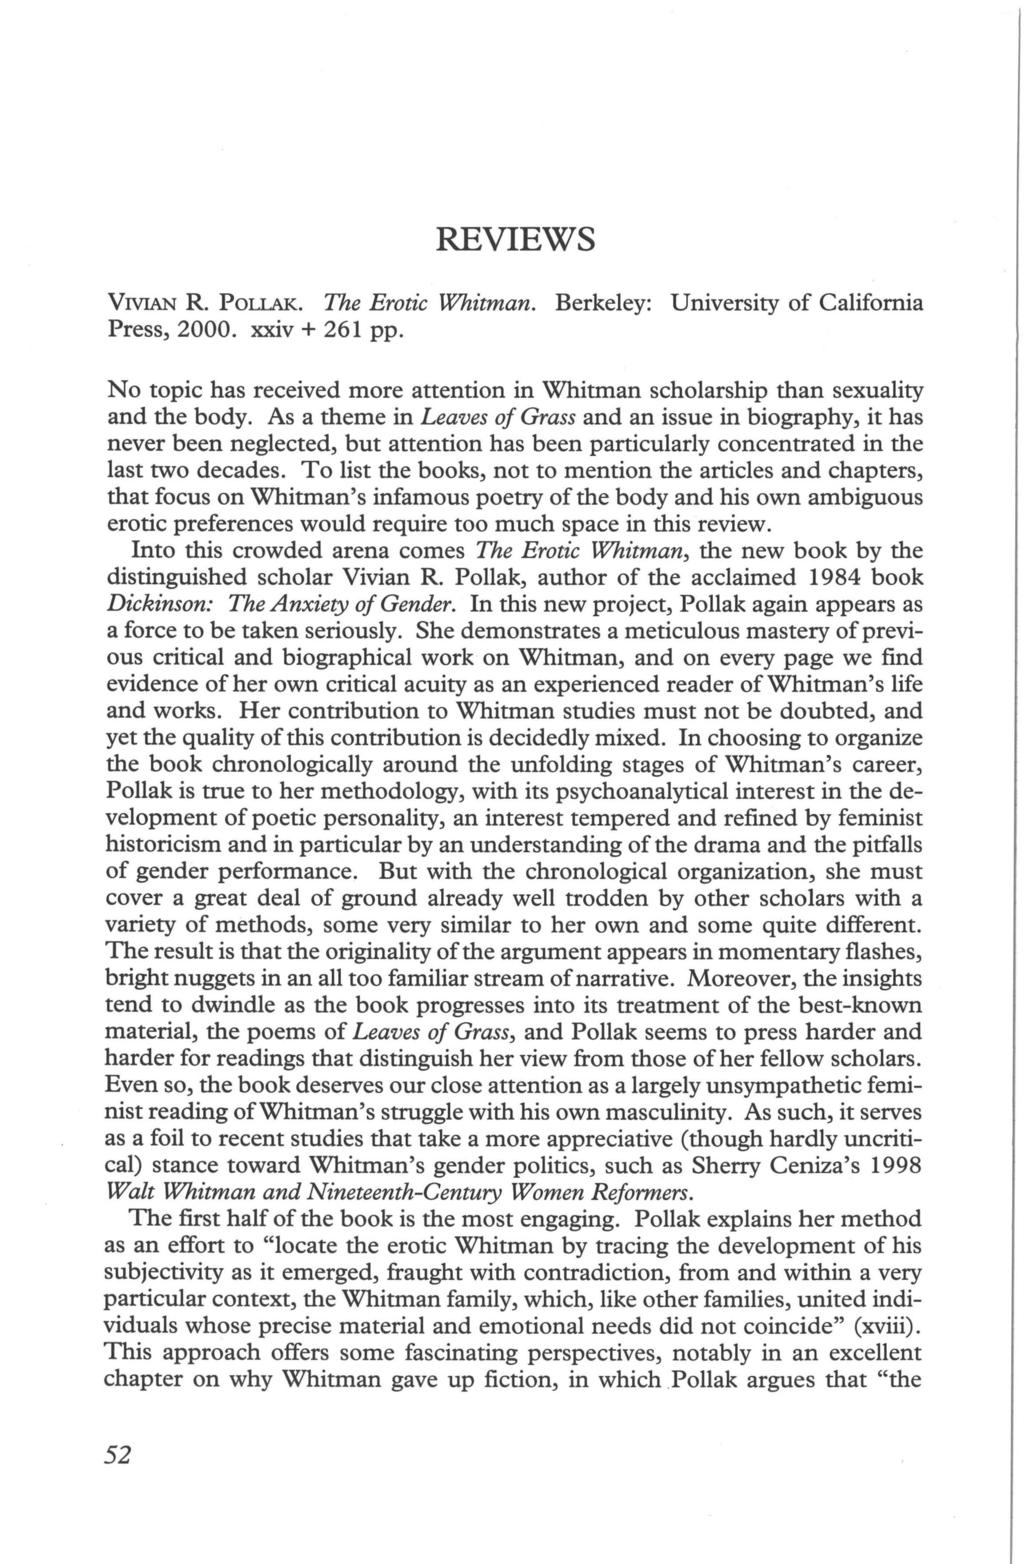 REVIEWS VMAN R. POlLAK. The Erotic Whitman. Berkeley: University of California Press,2000. xxiv + 261 pp. No topic has received more attention in Whitman scholarship than sexuality and the body.